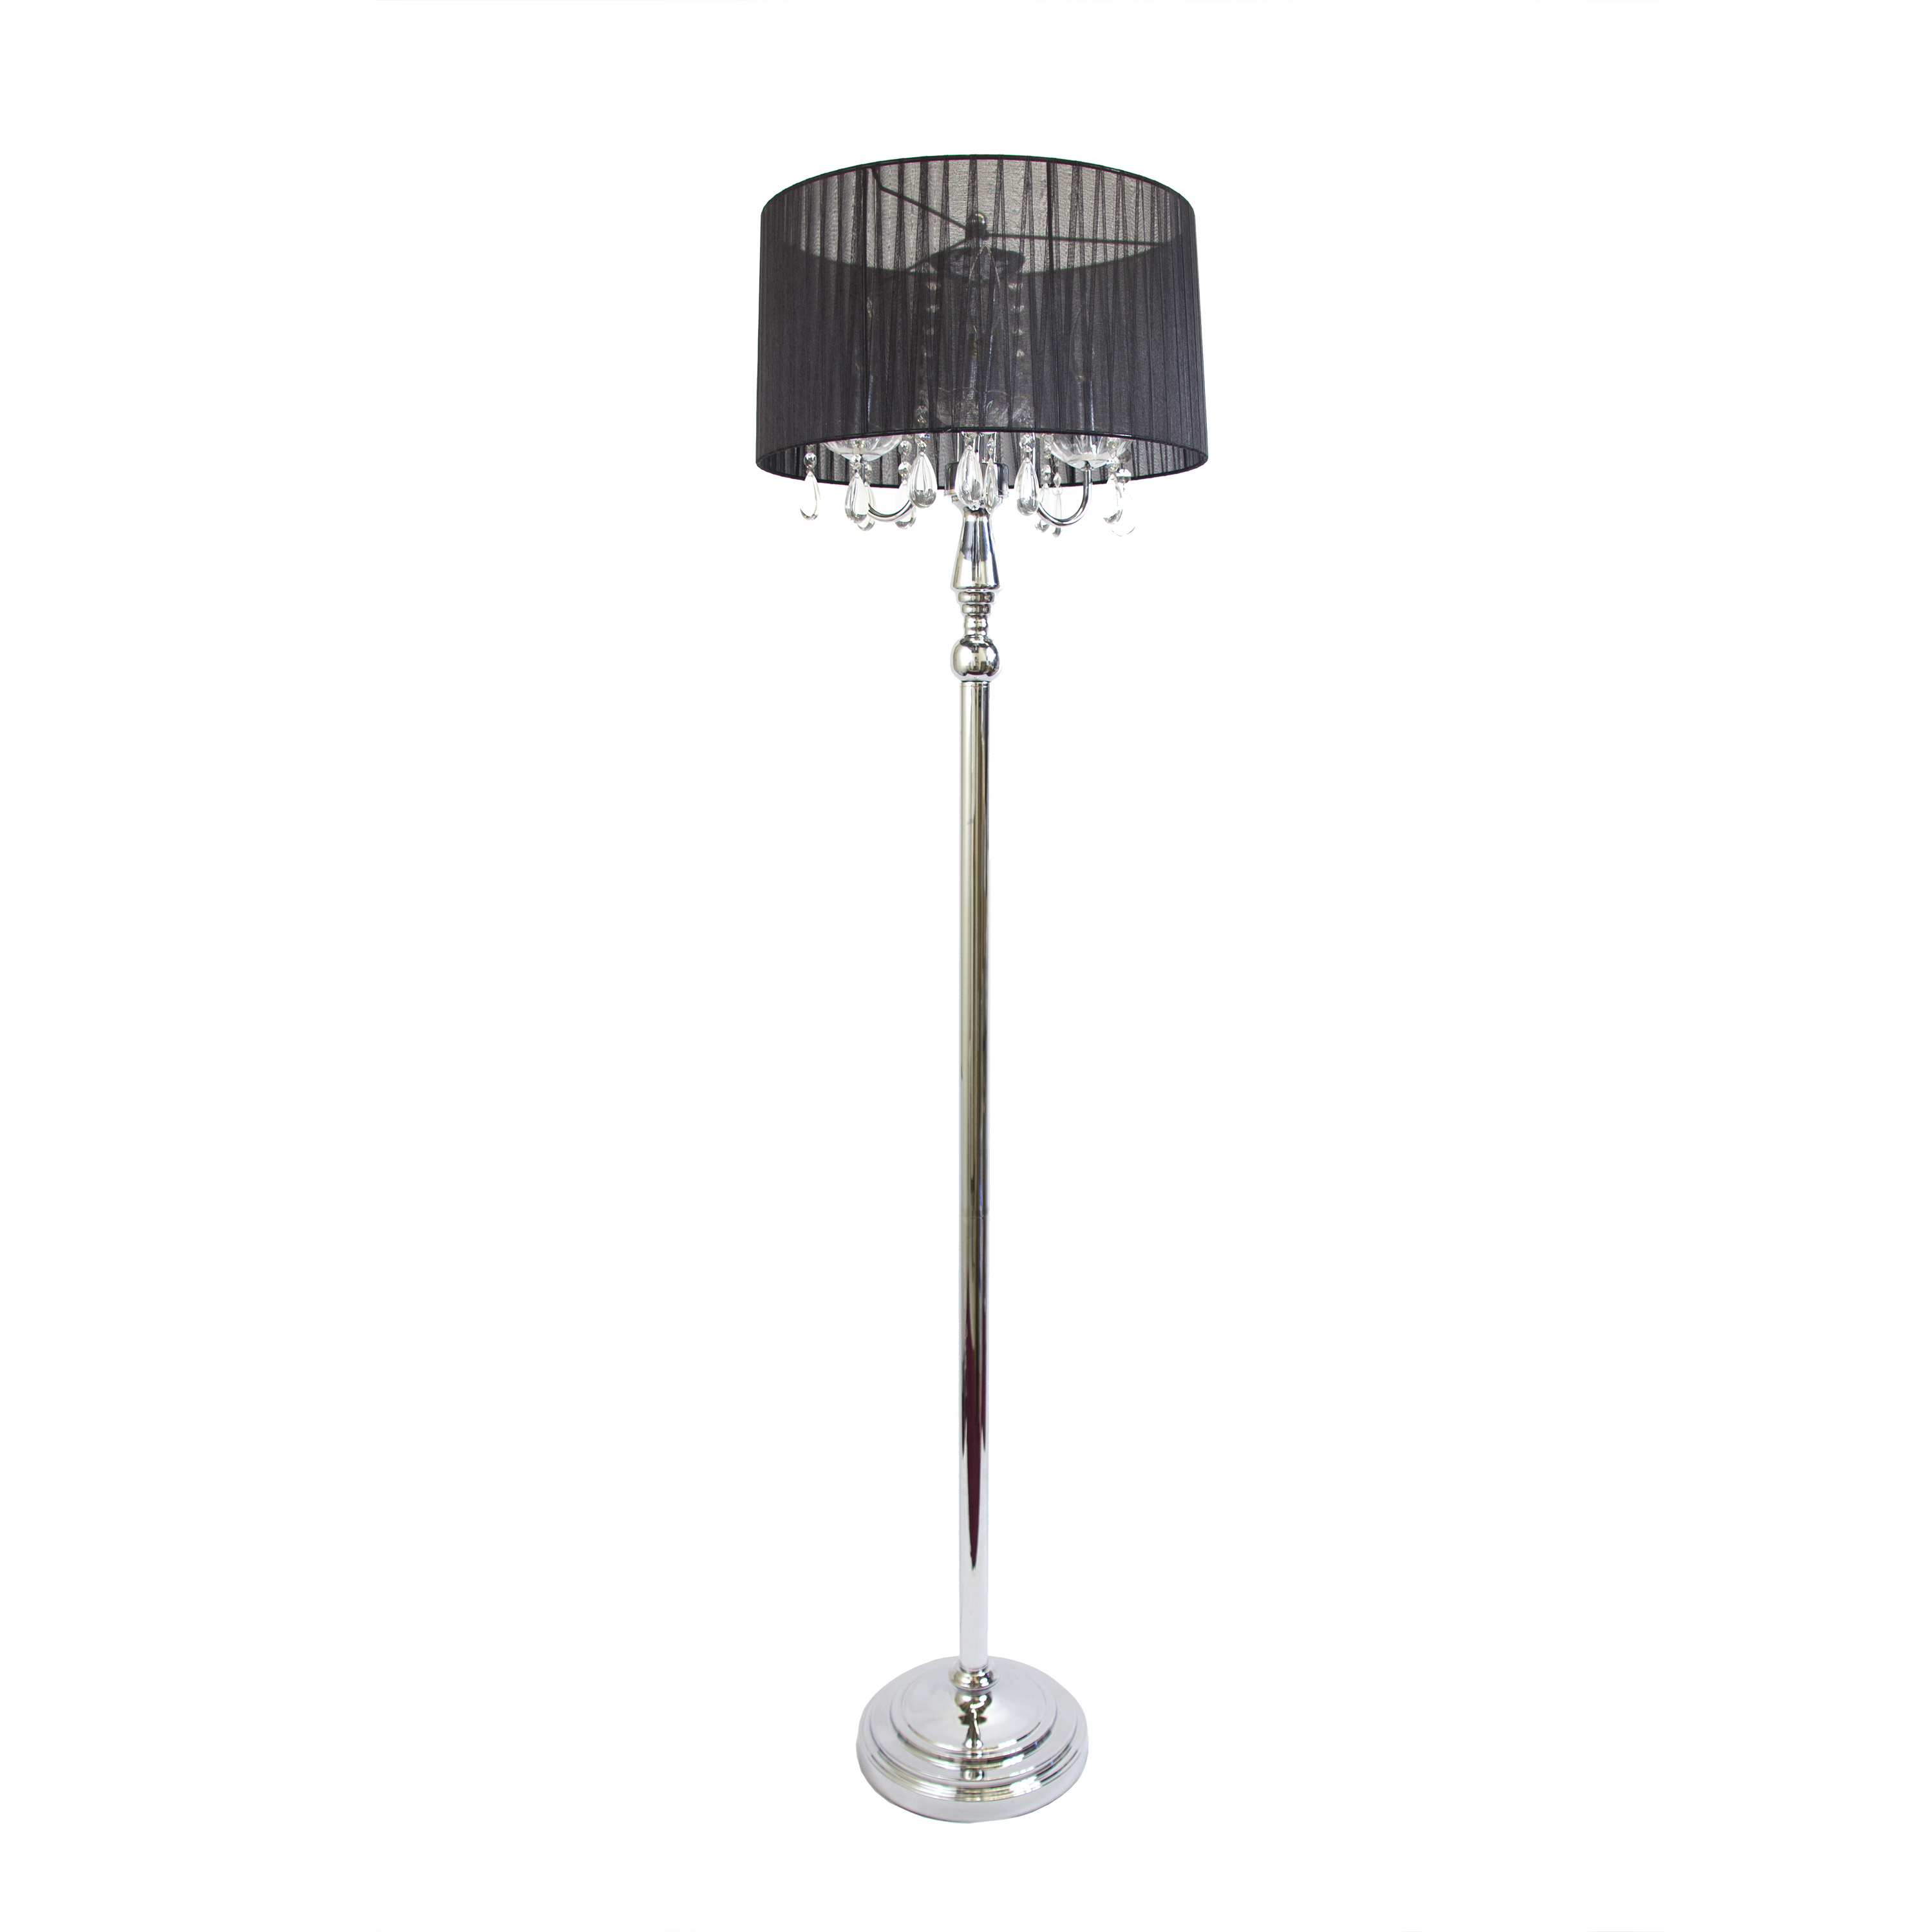 Details About Elegant Designs Trendy Romantic Sheer Shade Floor Lamp With Hanging Crystals in dimensions 3000 X 3000